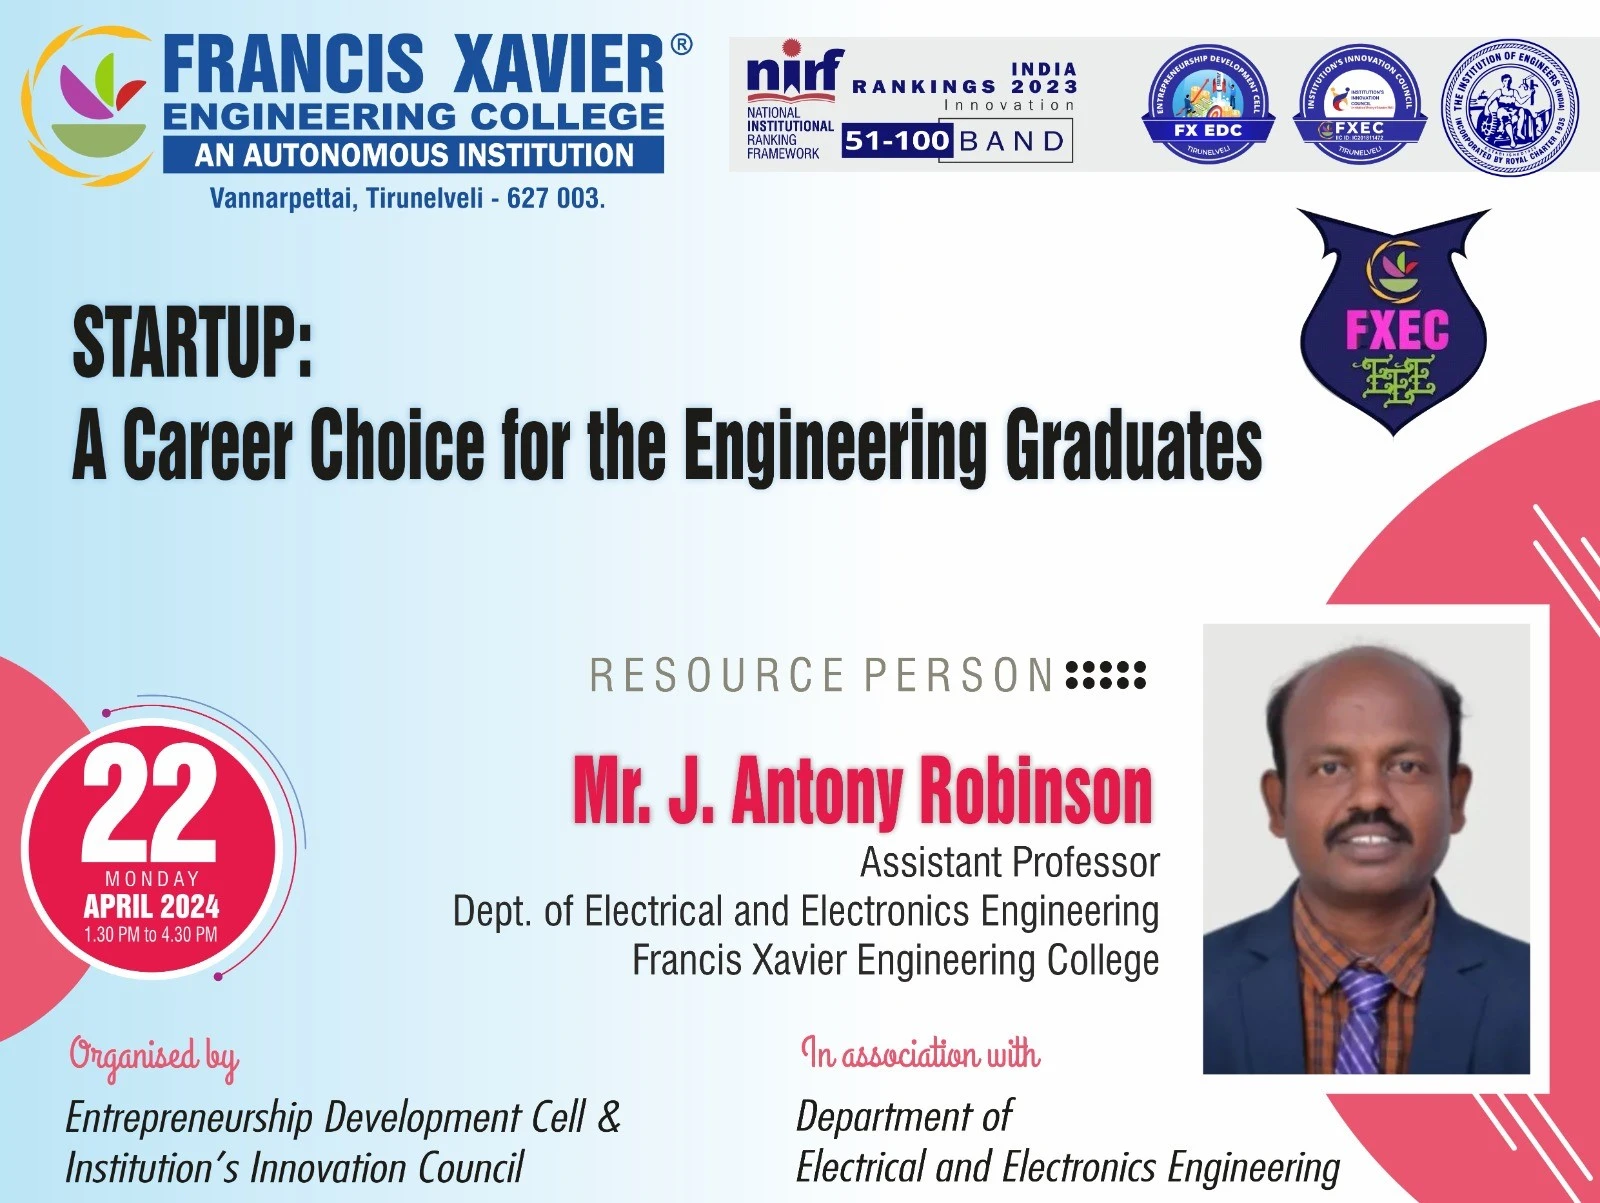 A Career Choice for the Engineering Graduates